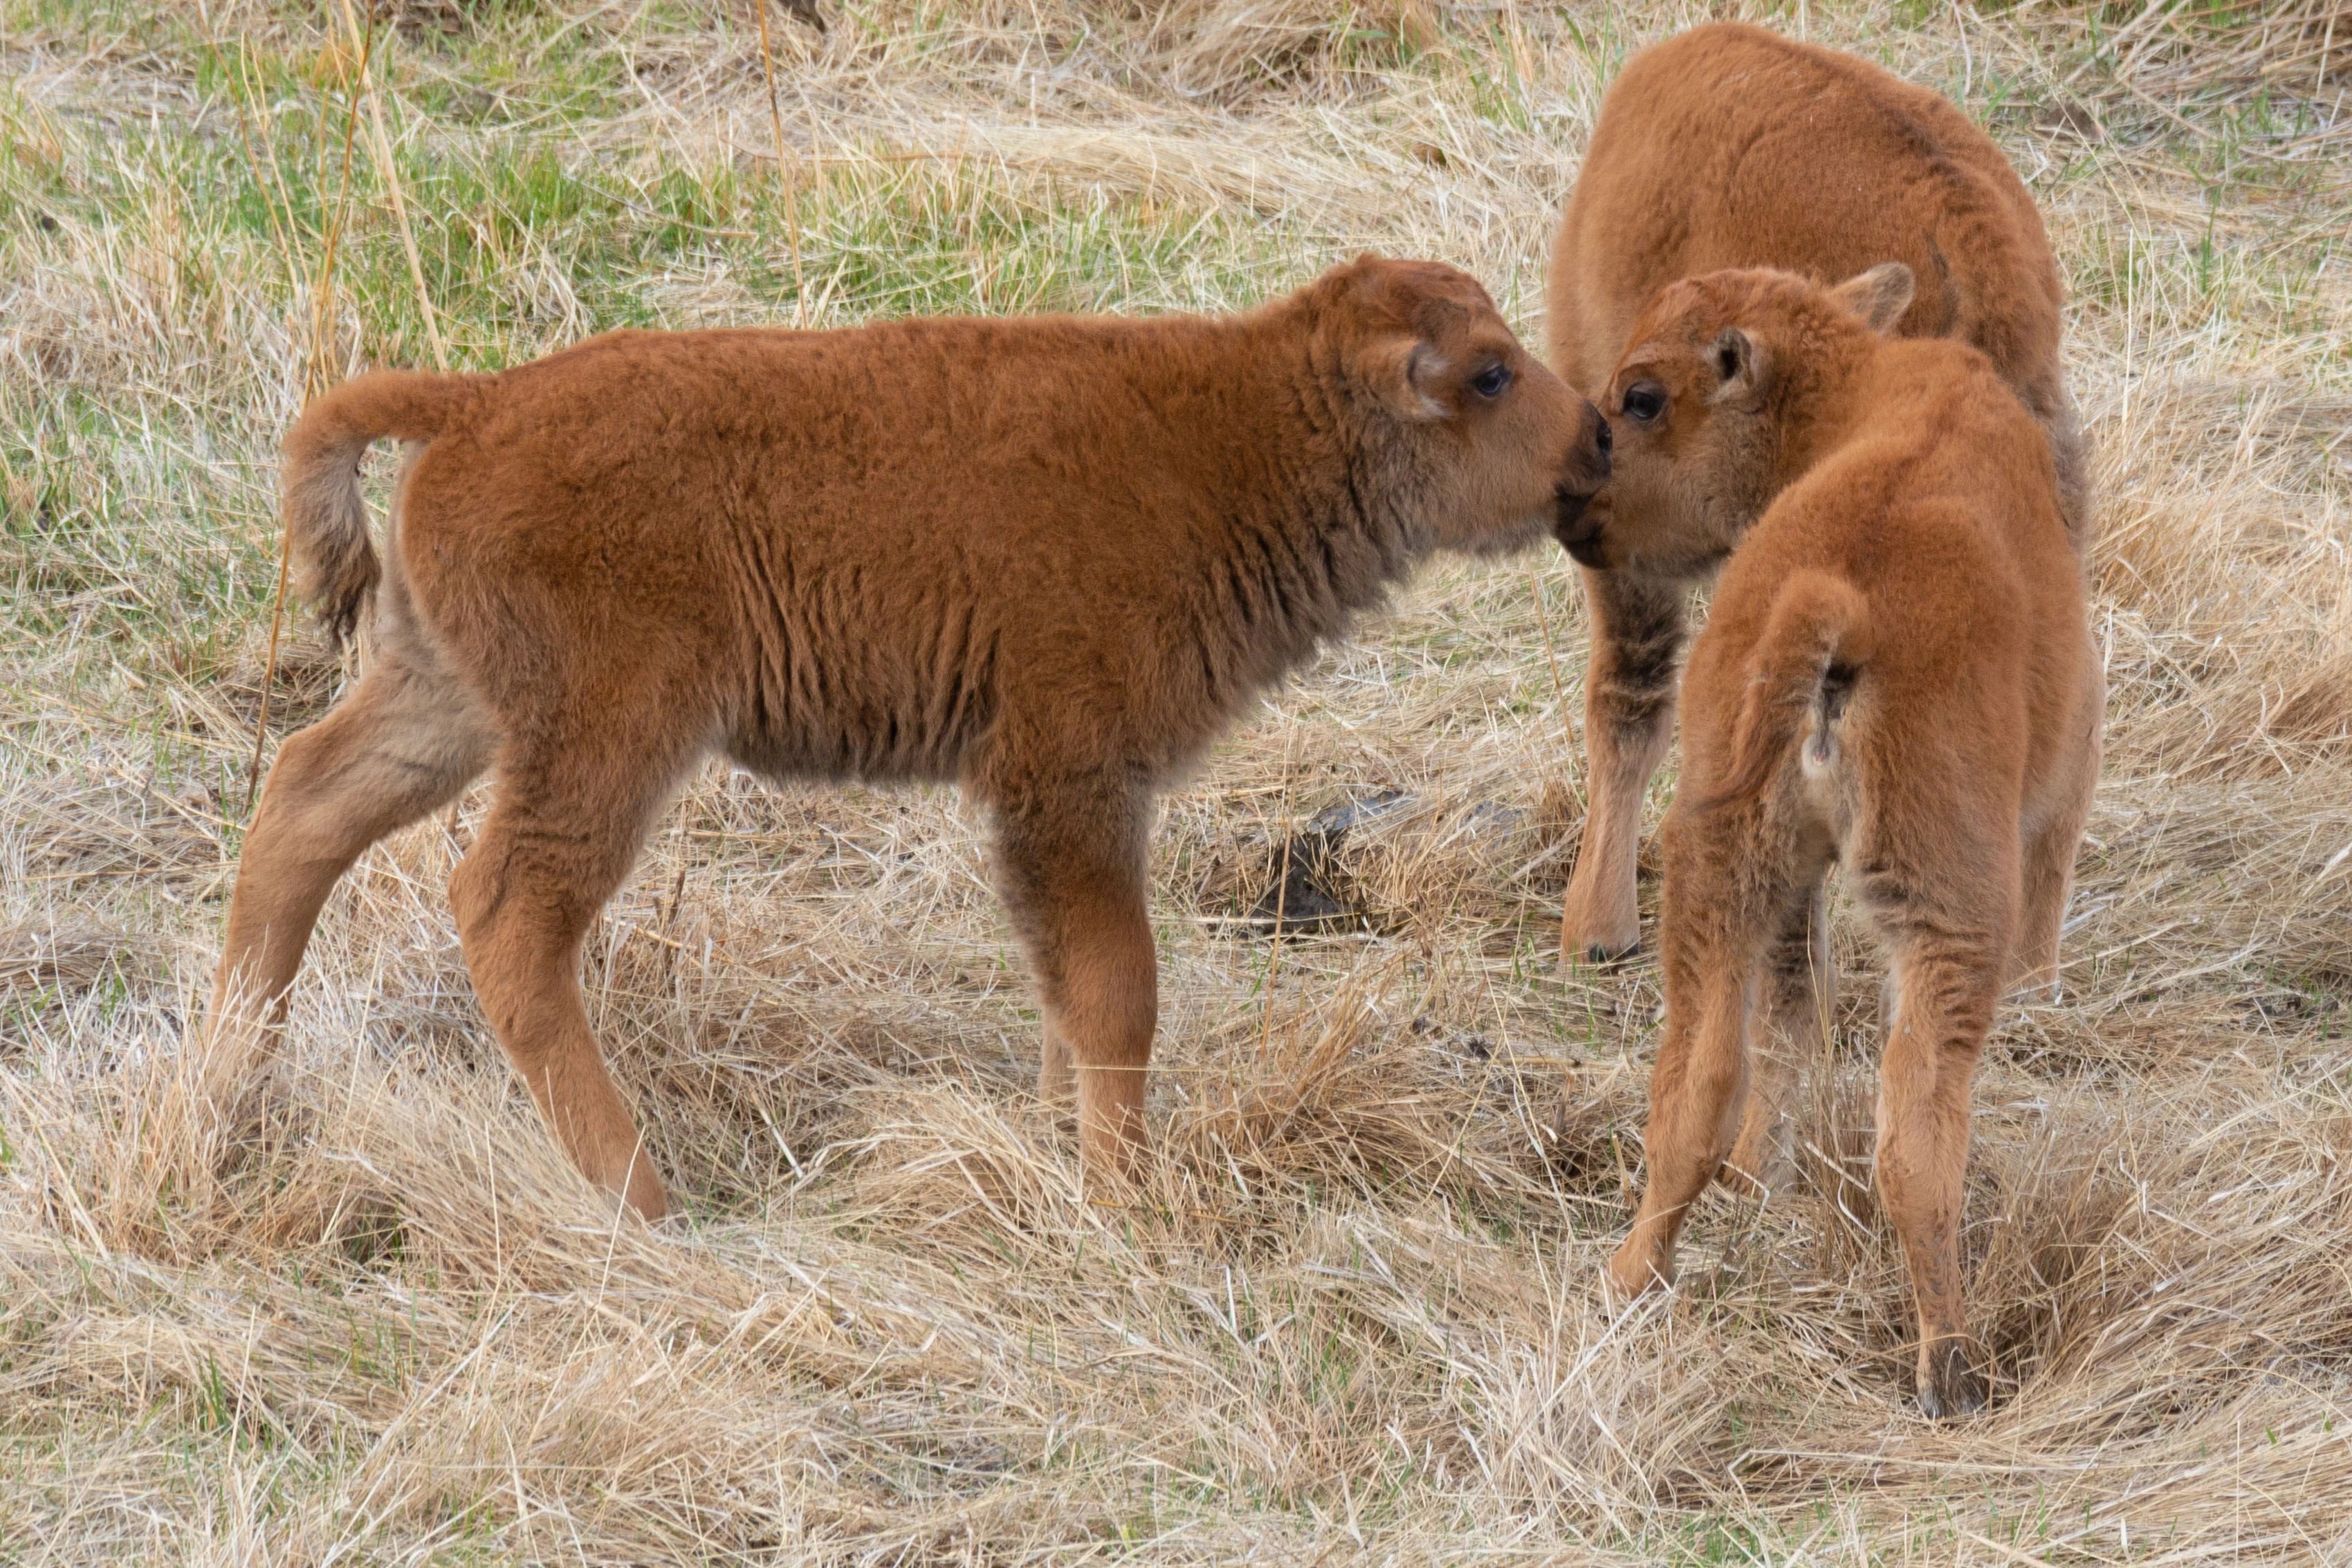 BabyBisonKissing.webp__PID:8f553bb1-3bfe-42ed-9287-22ad7d8646a9